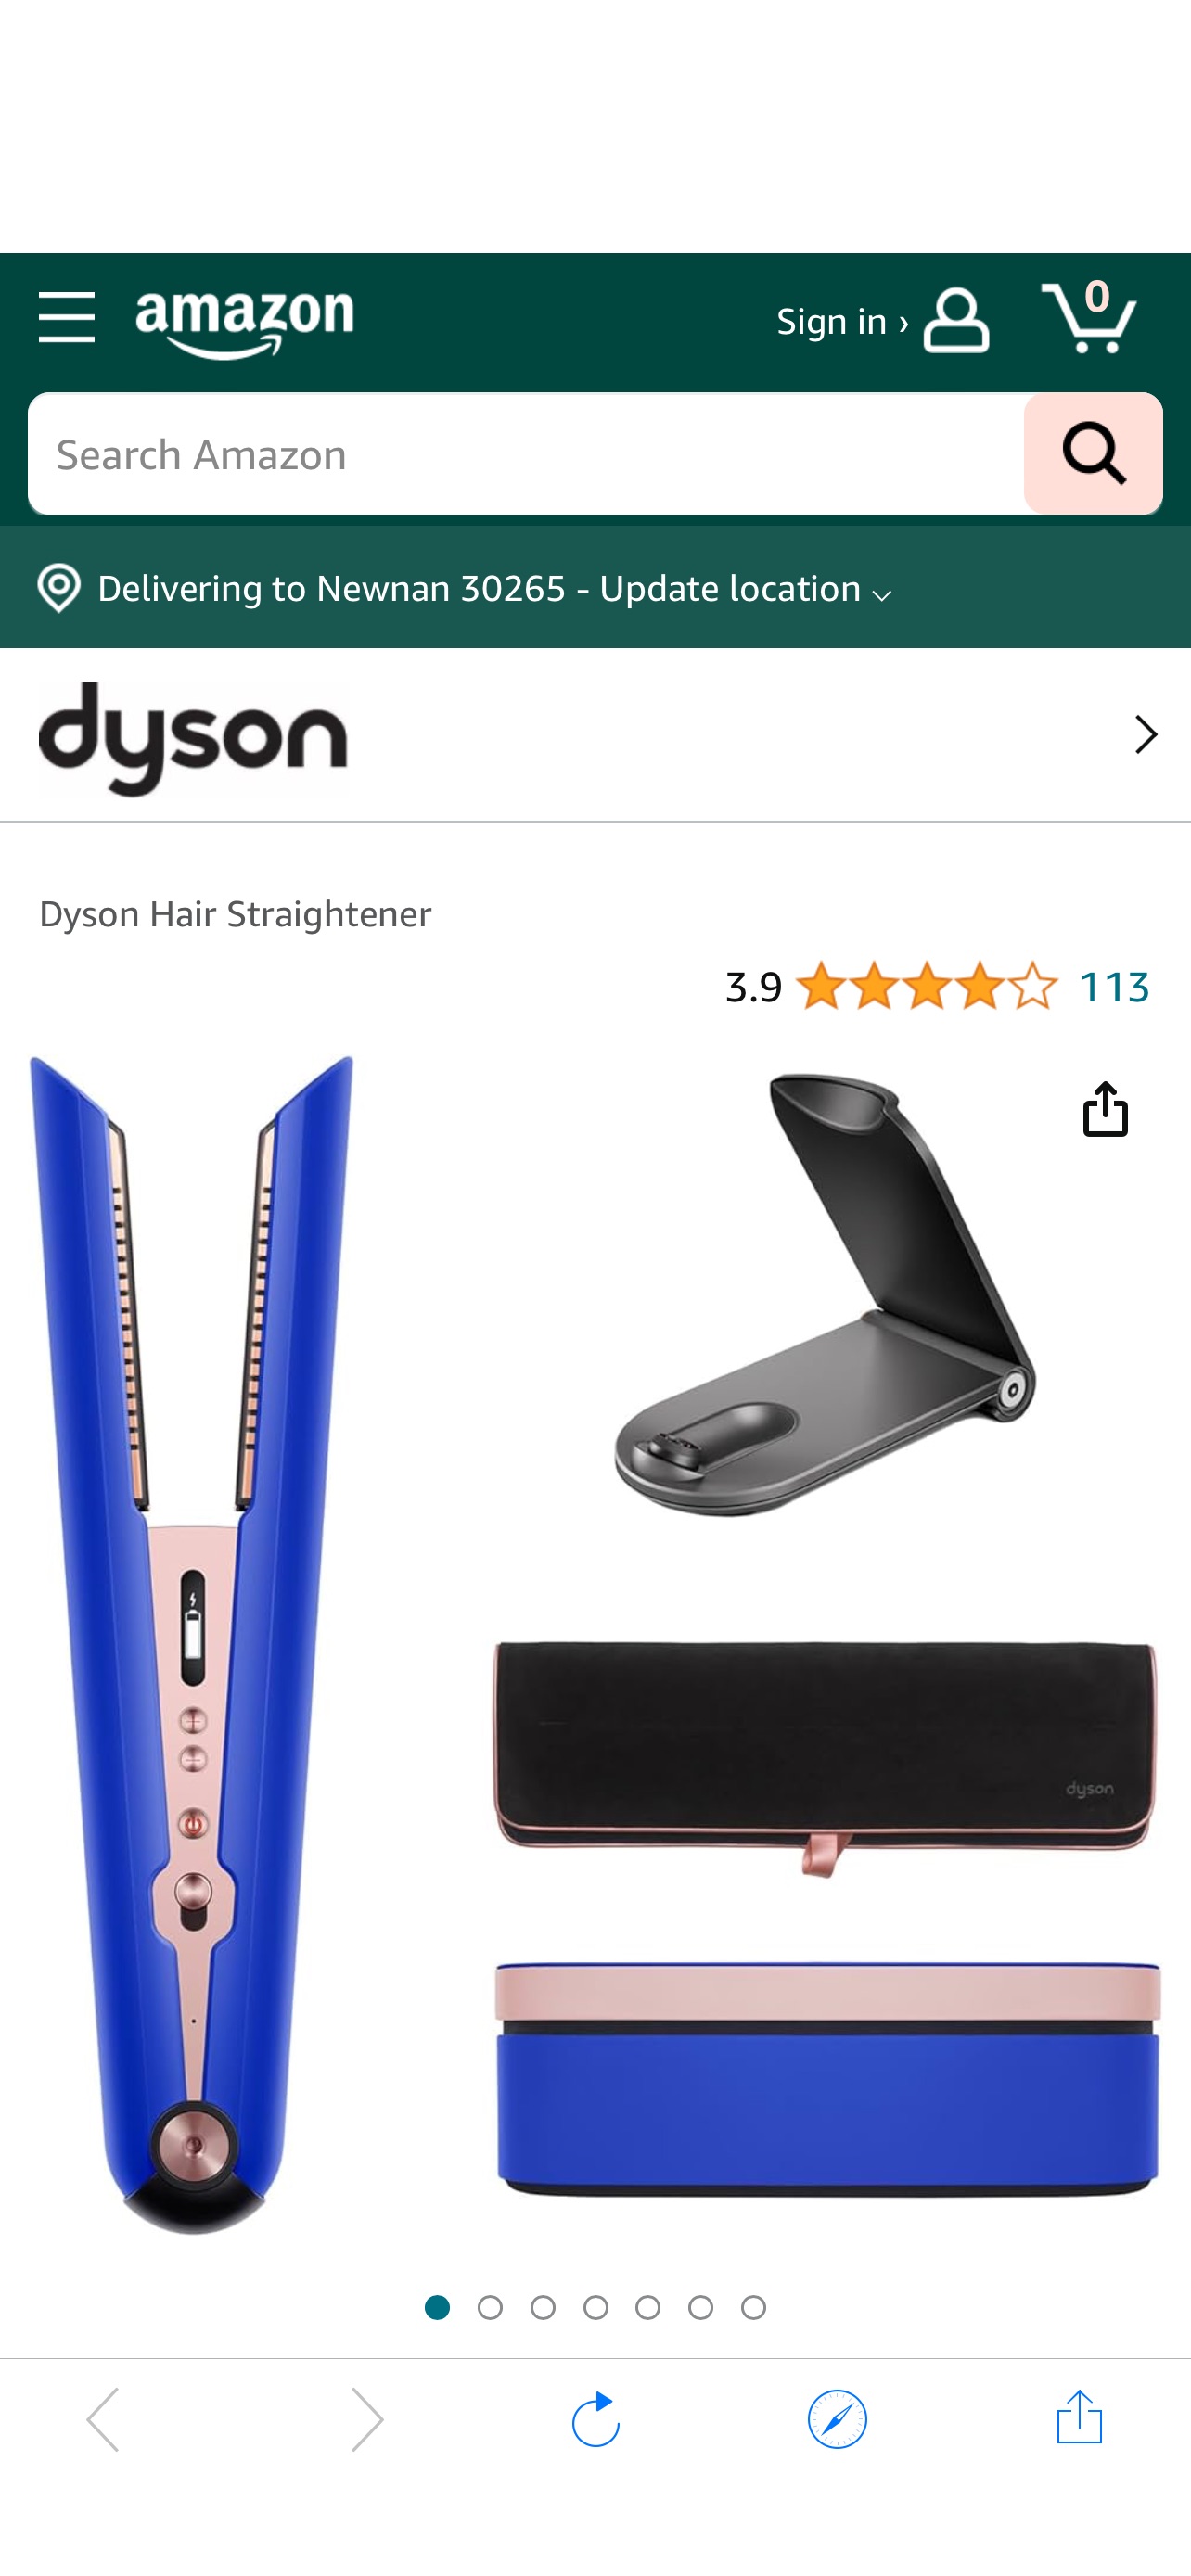 Amazon.com: Dyson Corrale™ Hair Straightener in Special Edition Blue Blush : Beauty & Personal Care拉直板